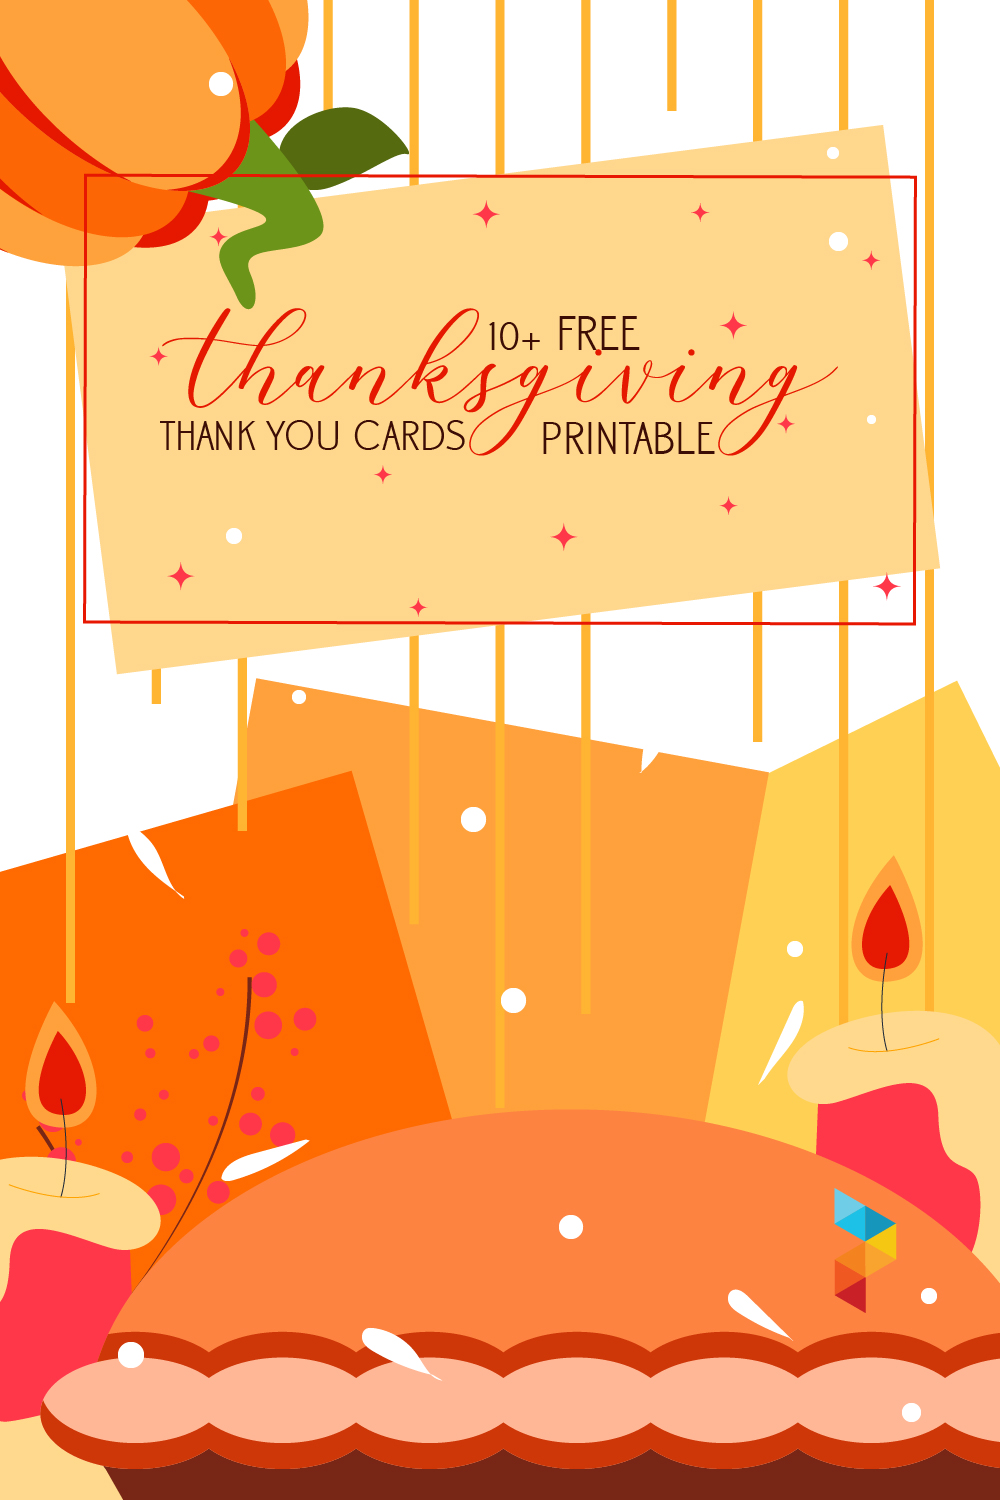 Thanksgiving Thank You Cards